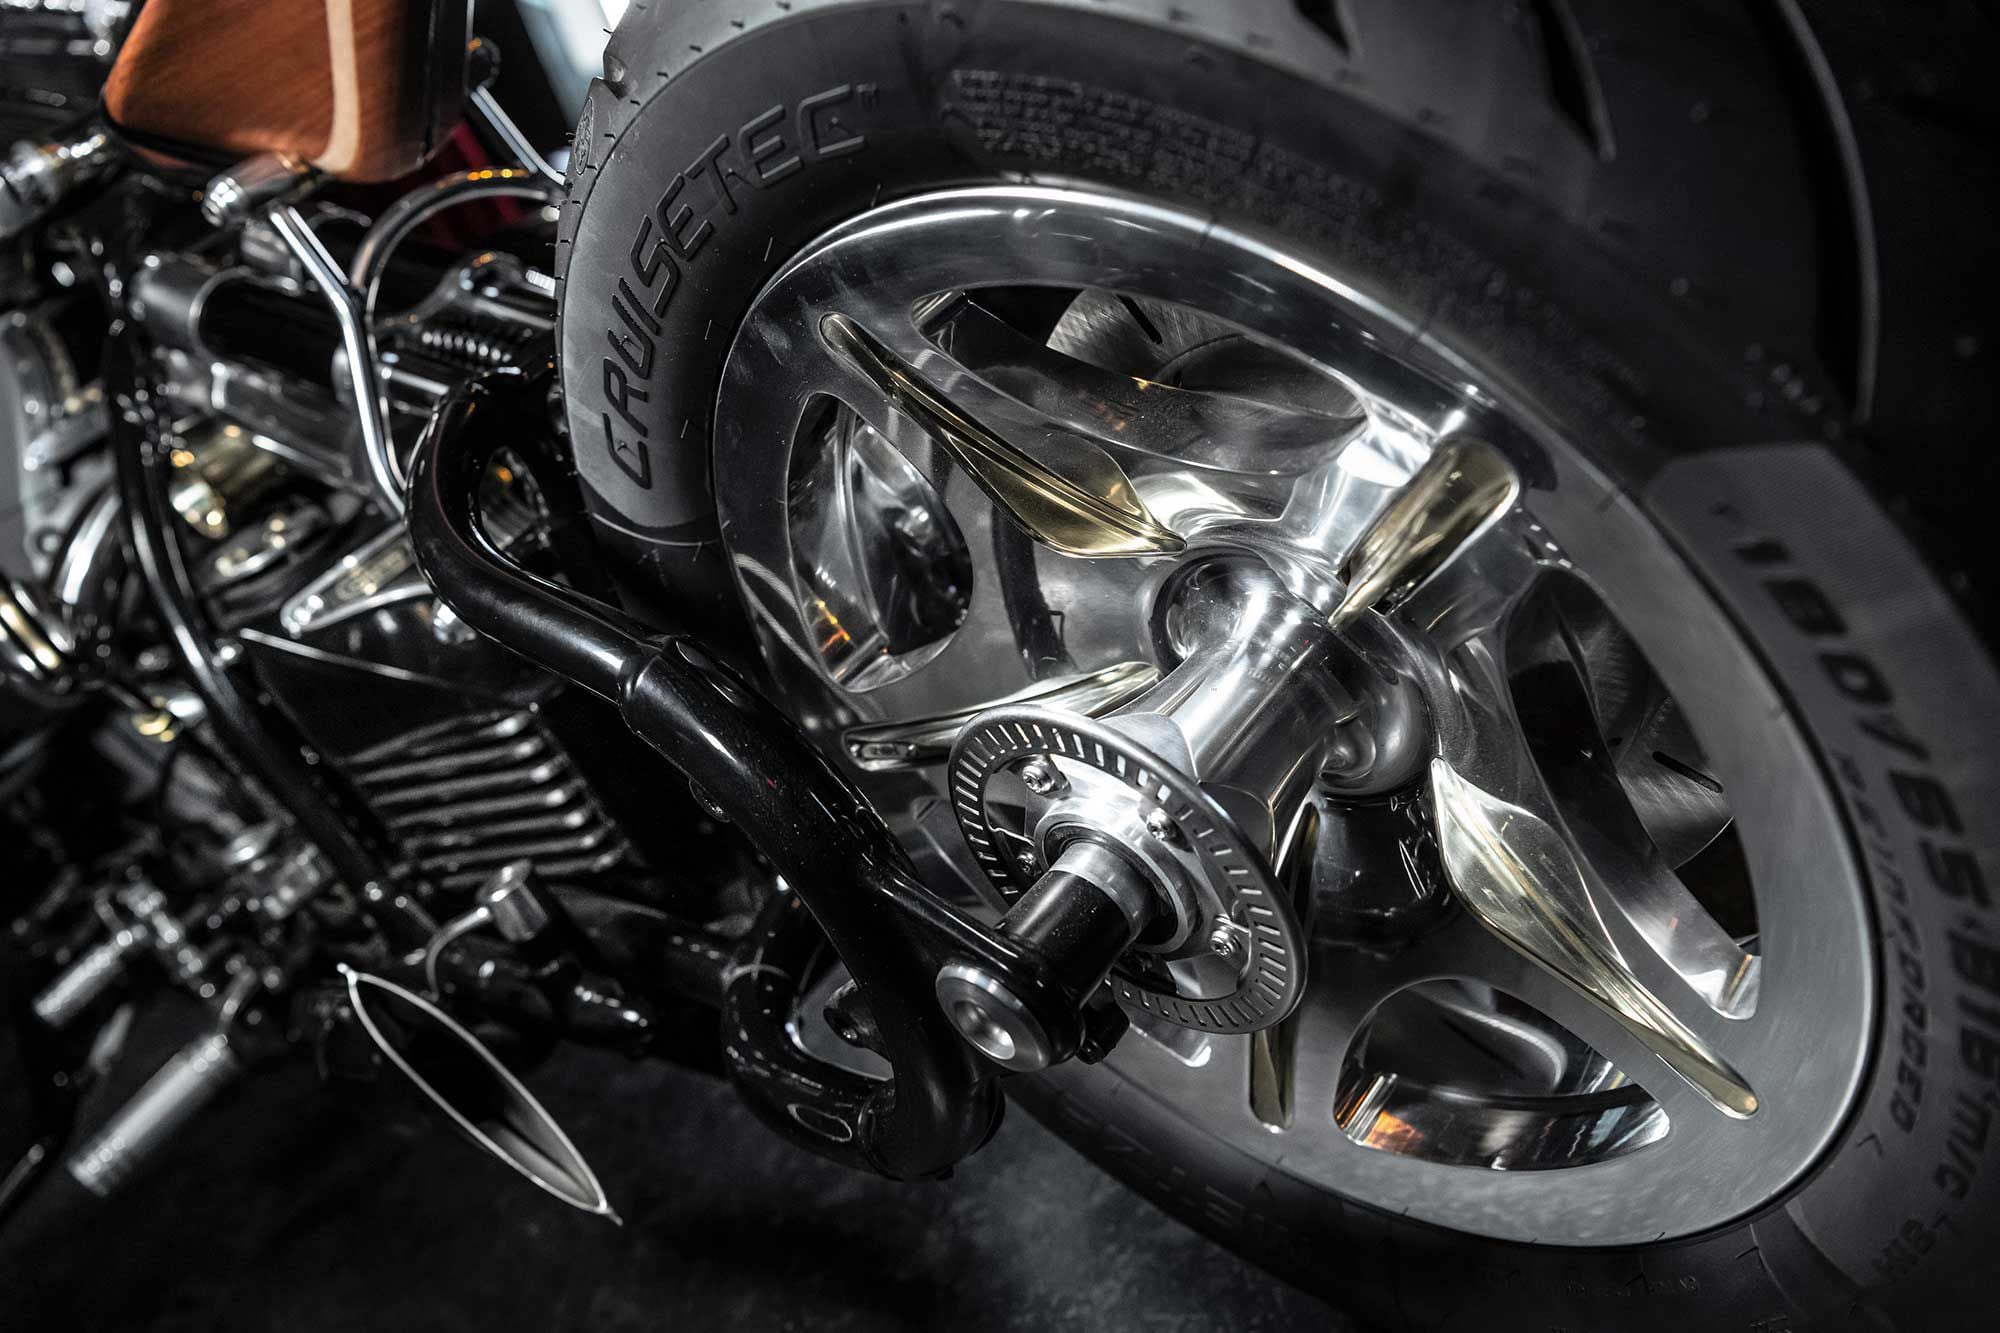 The only part that uses the latest manufacturing techniques is the wheel machined from the billet (although designed by Radikal Chopper). Brake discs and calipers were also specially made.